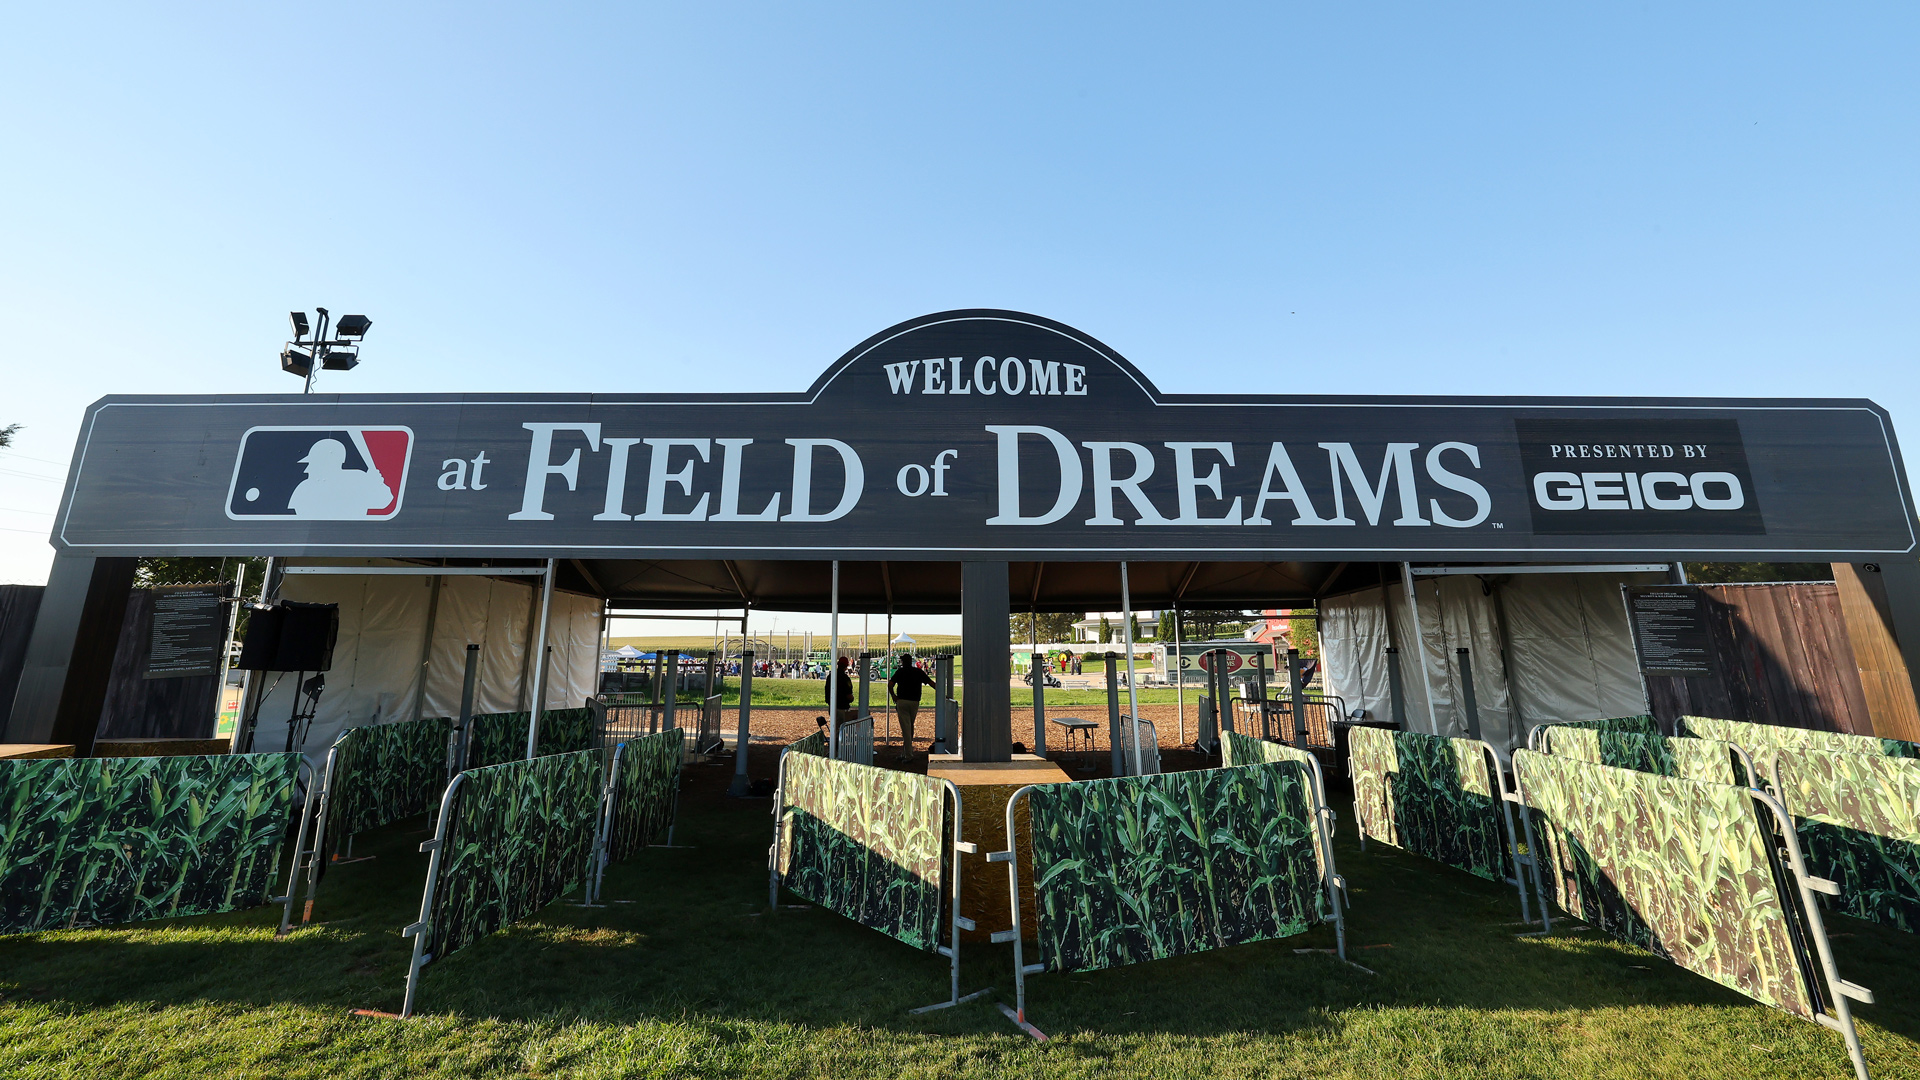 Cubs and Reds to play in 2022 Field of Dreams game, per report